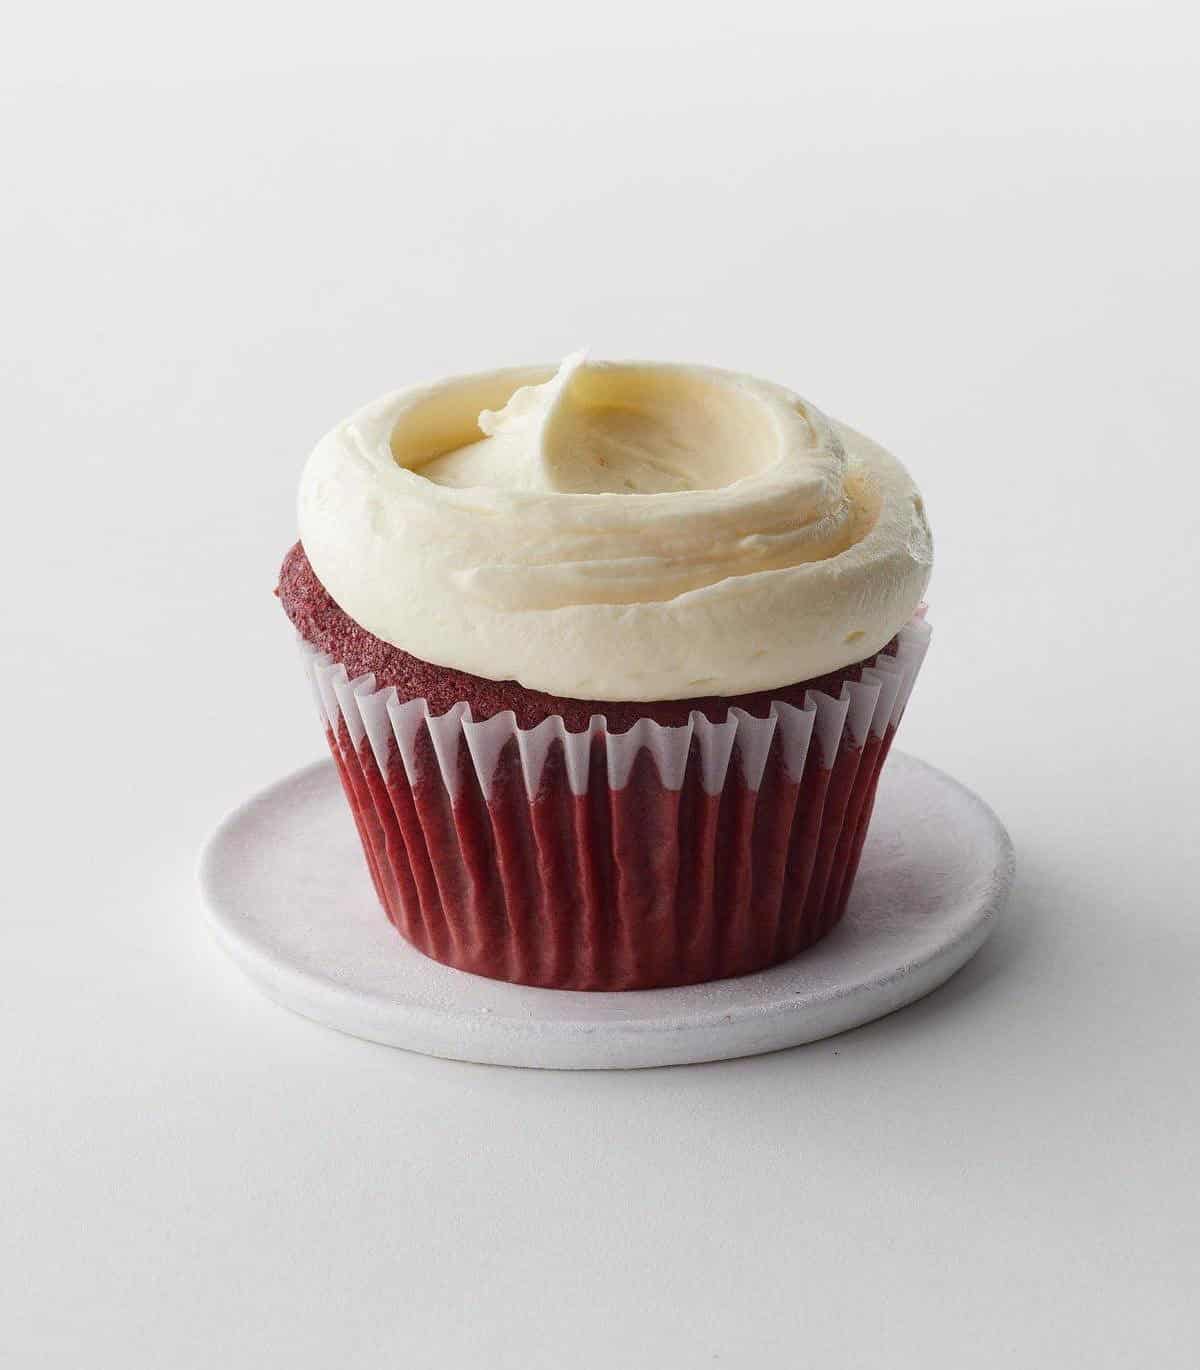  The creamy white icing sits atop of these cupcakes like a cloud.